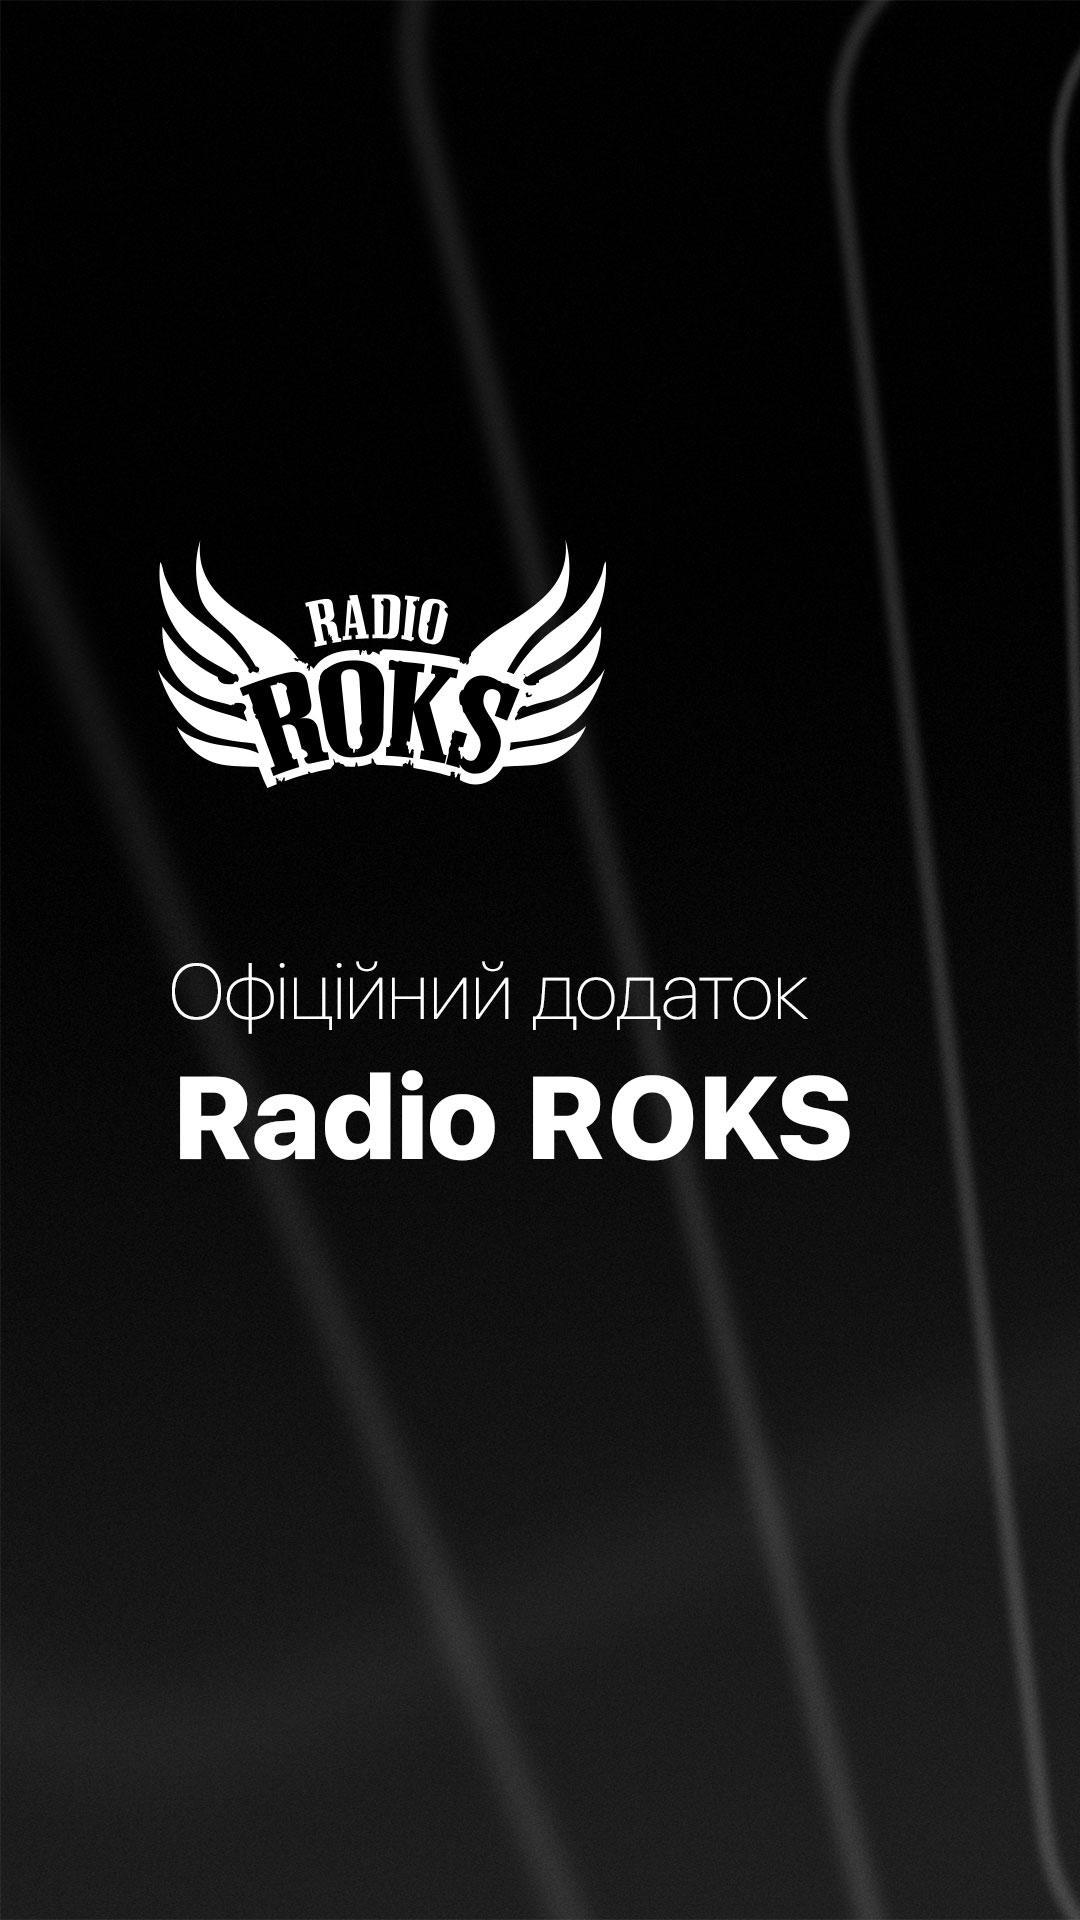 Radio ROKS for Android - APK Download